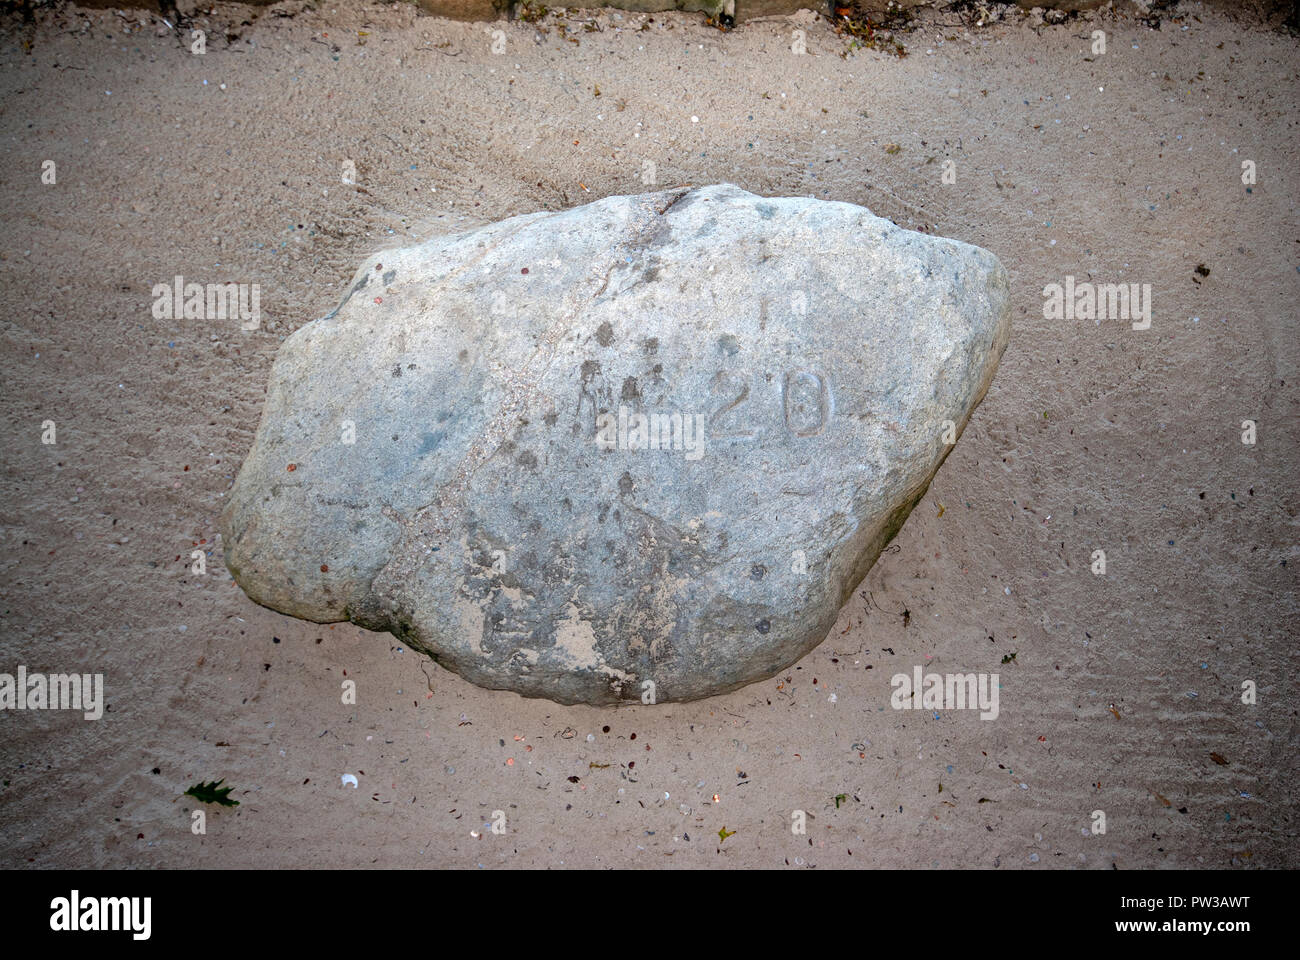 Plymouth Rock, the stone on which the first pilgrims disembarked from the Mayflower ship in 1620, Plymouth, Plymouth County, Massachusetts, USA Stock Photo